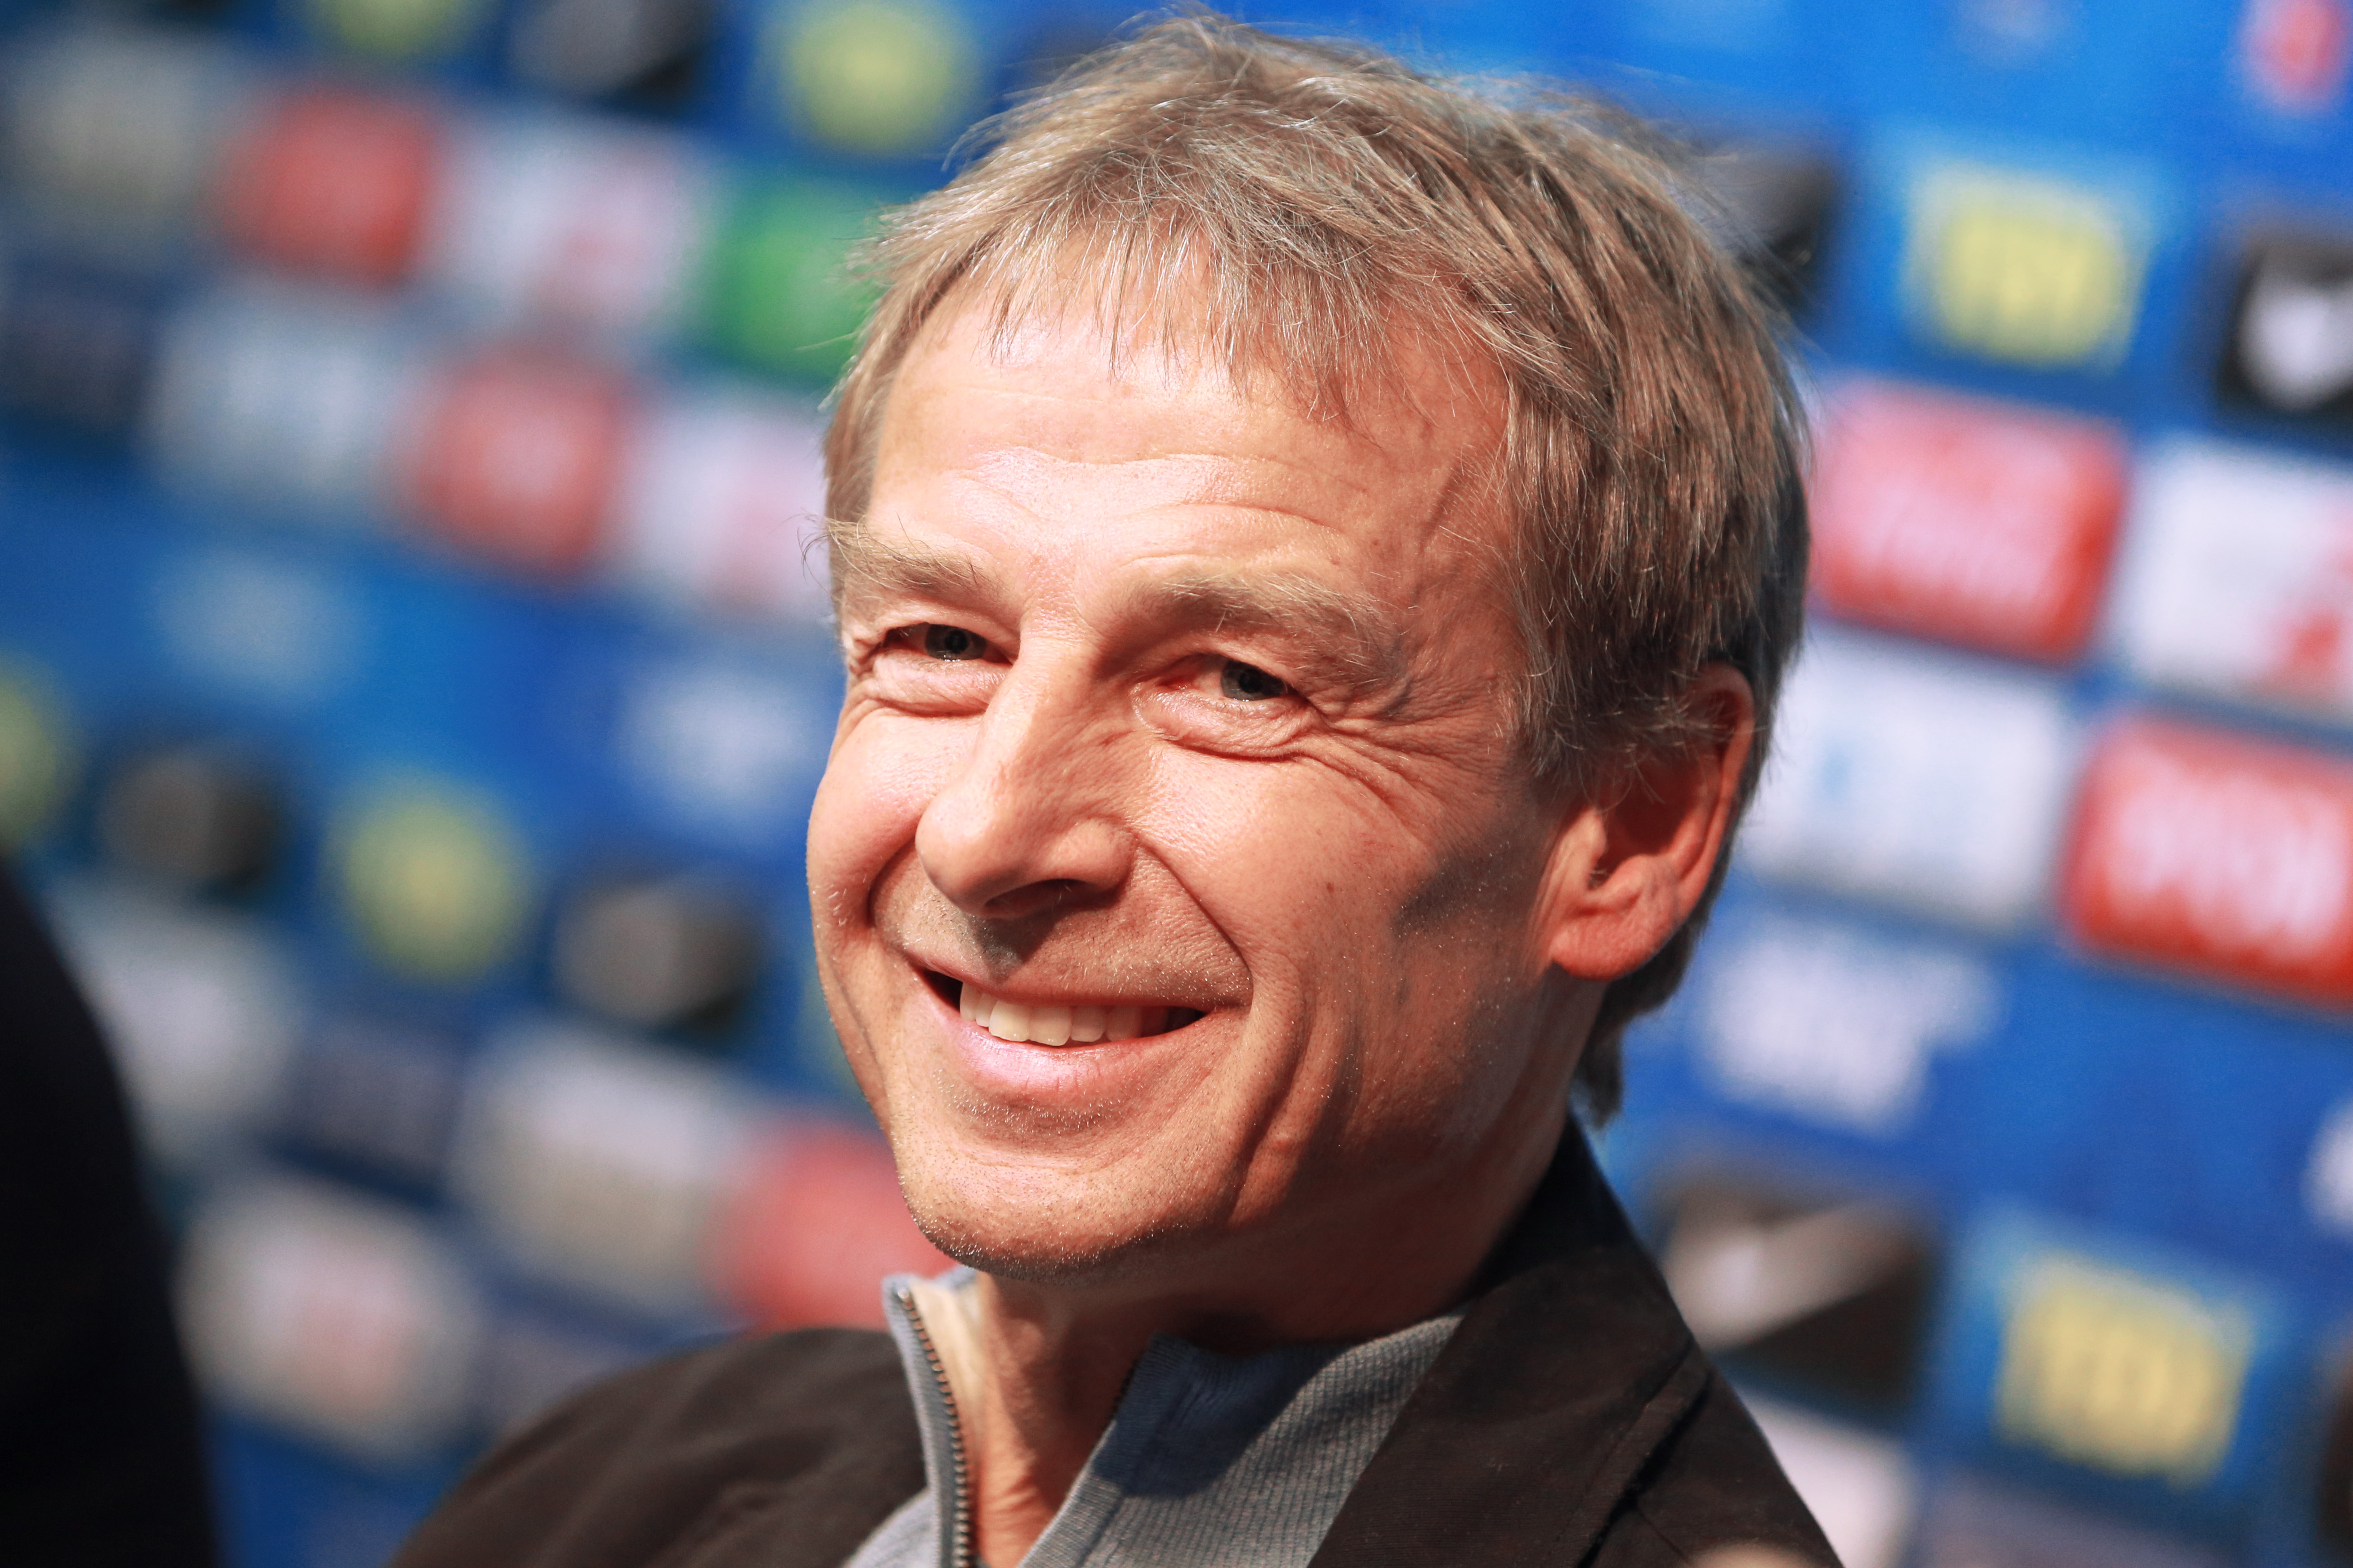 BERLIN, GERMANY - NOVEMBER 27: Juergen Klinsmann, newly appointed head coach of Hertha BSC Berlin, smiles during a press conference on November 27, 2019 in Berlin, Germany. (Photo by Christian Marquardt/Bongarts/Getty Images)